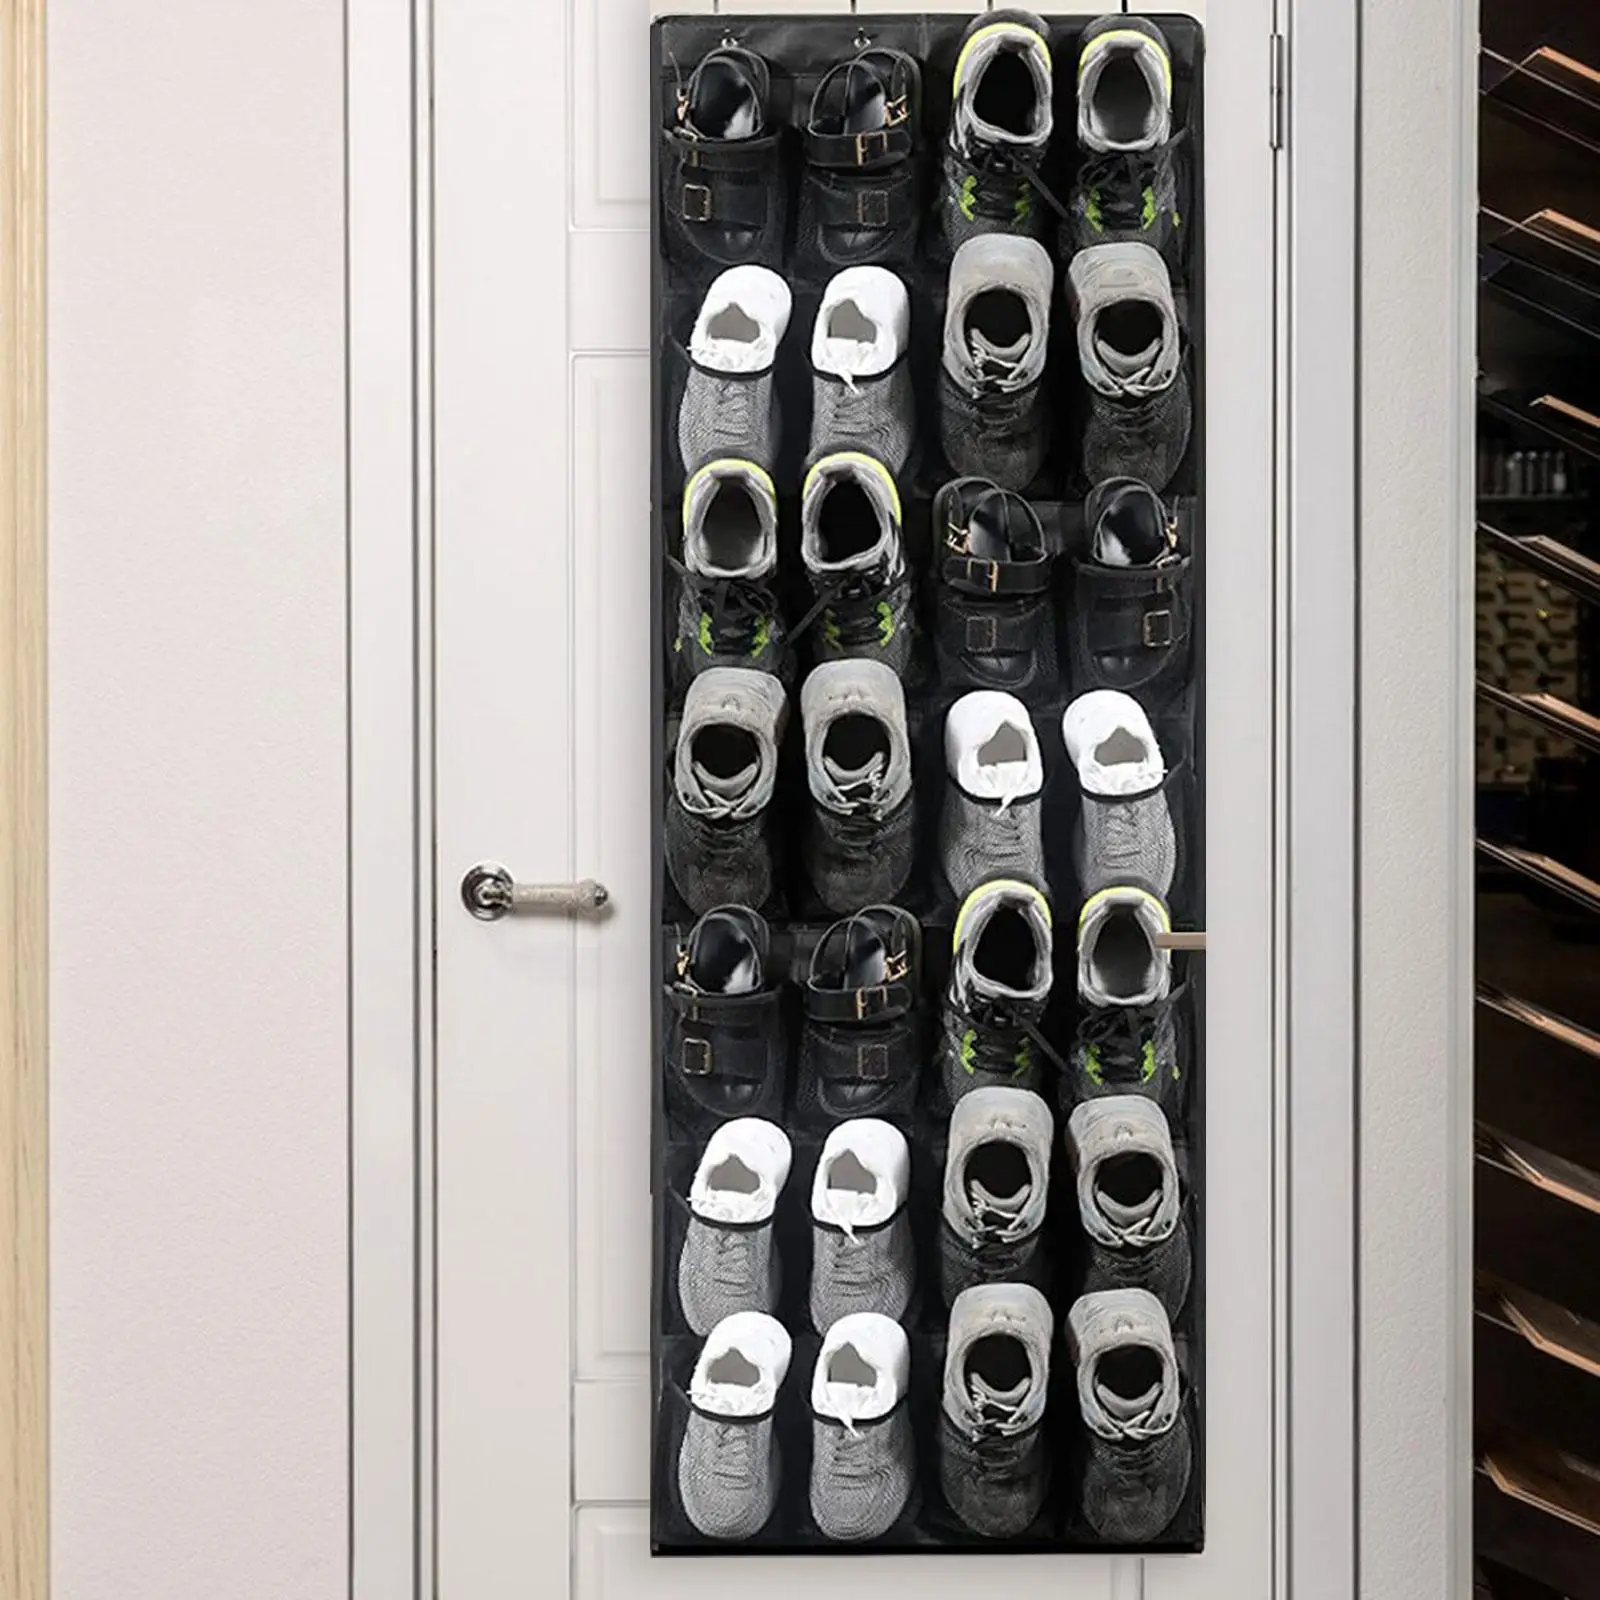 Over The Door Shoe Organizers with 28 Extra Large Fabric Pockets Hanging Shoe Organizer Shoe Rack for Bathroom Slippers Bedroom